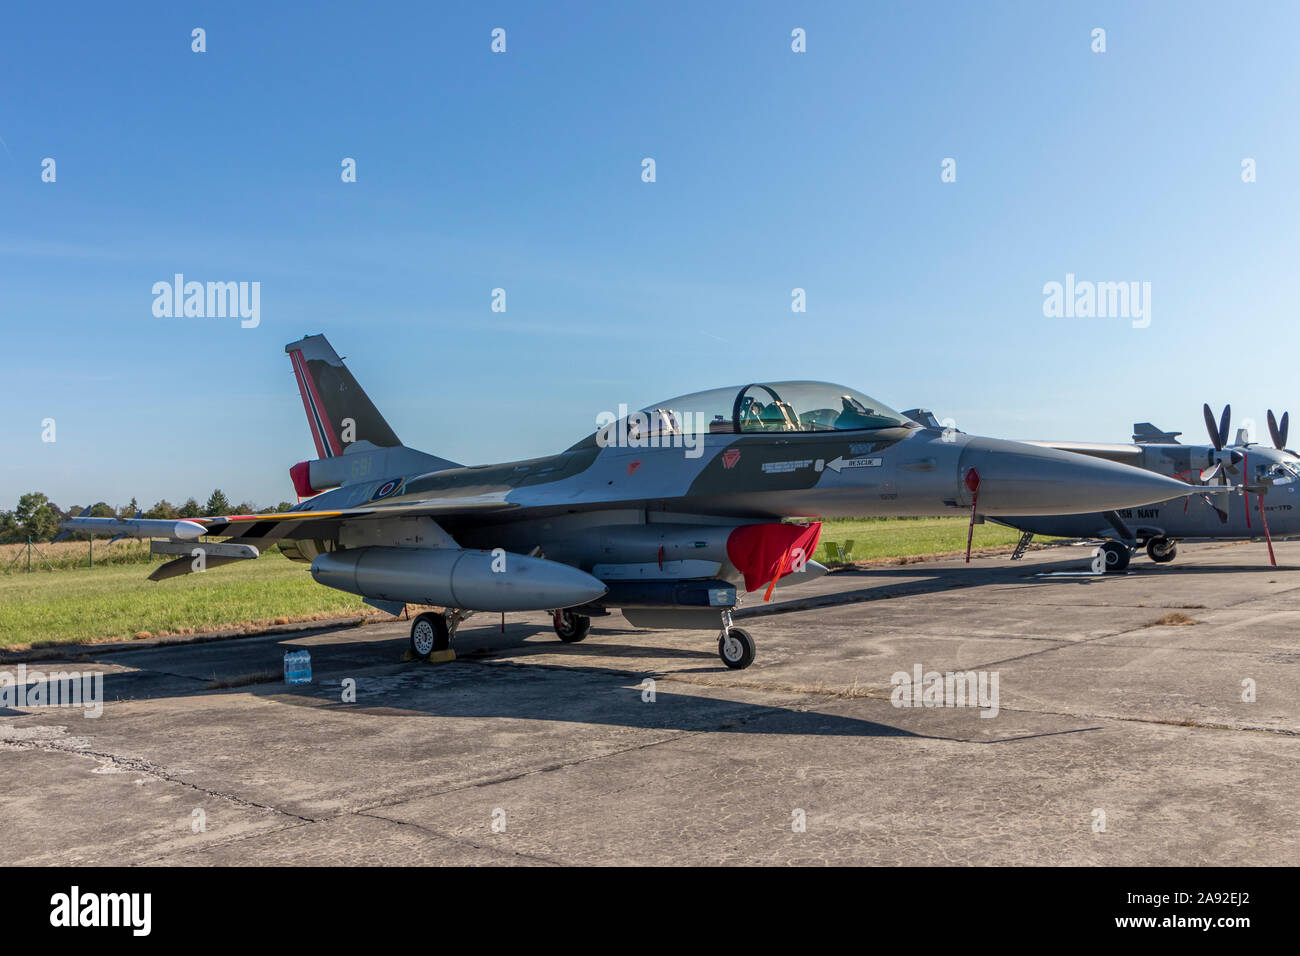 OSTRAVA, CZECH REPUBLIC - SEPTEMBER 22, 2019: NATO Days. F-16 fighter jet of the Royal Norwegian Air Force on static display. No people, blue sky, sun Stock Photo